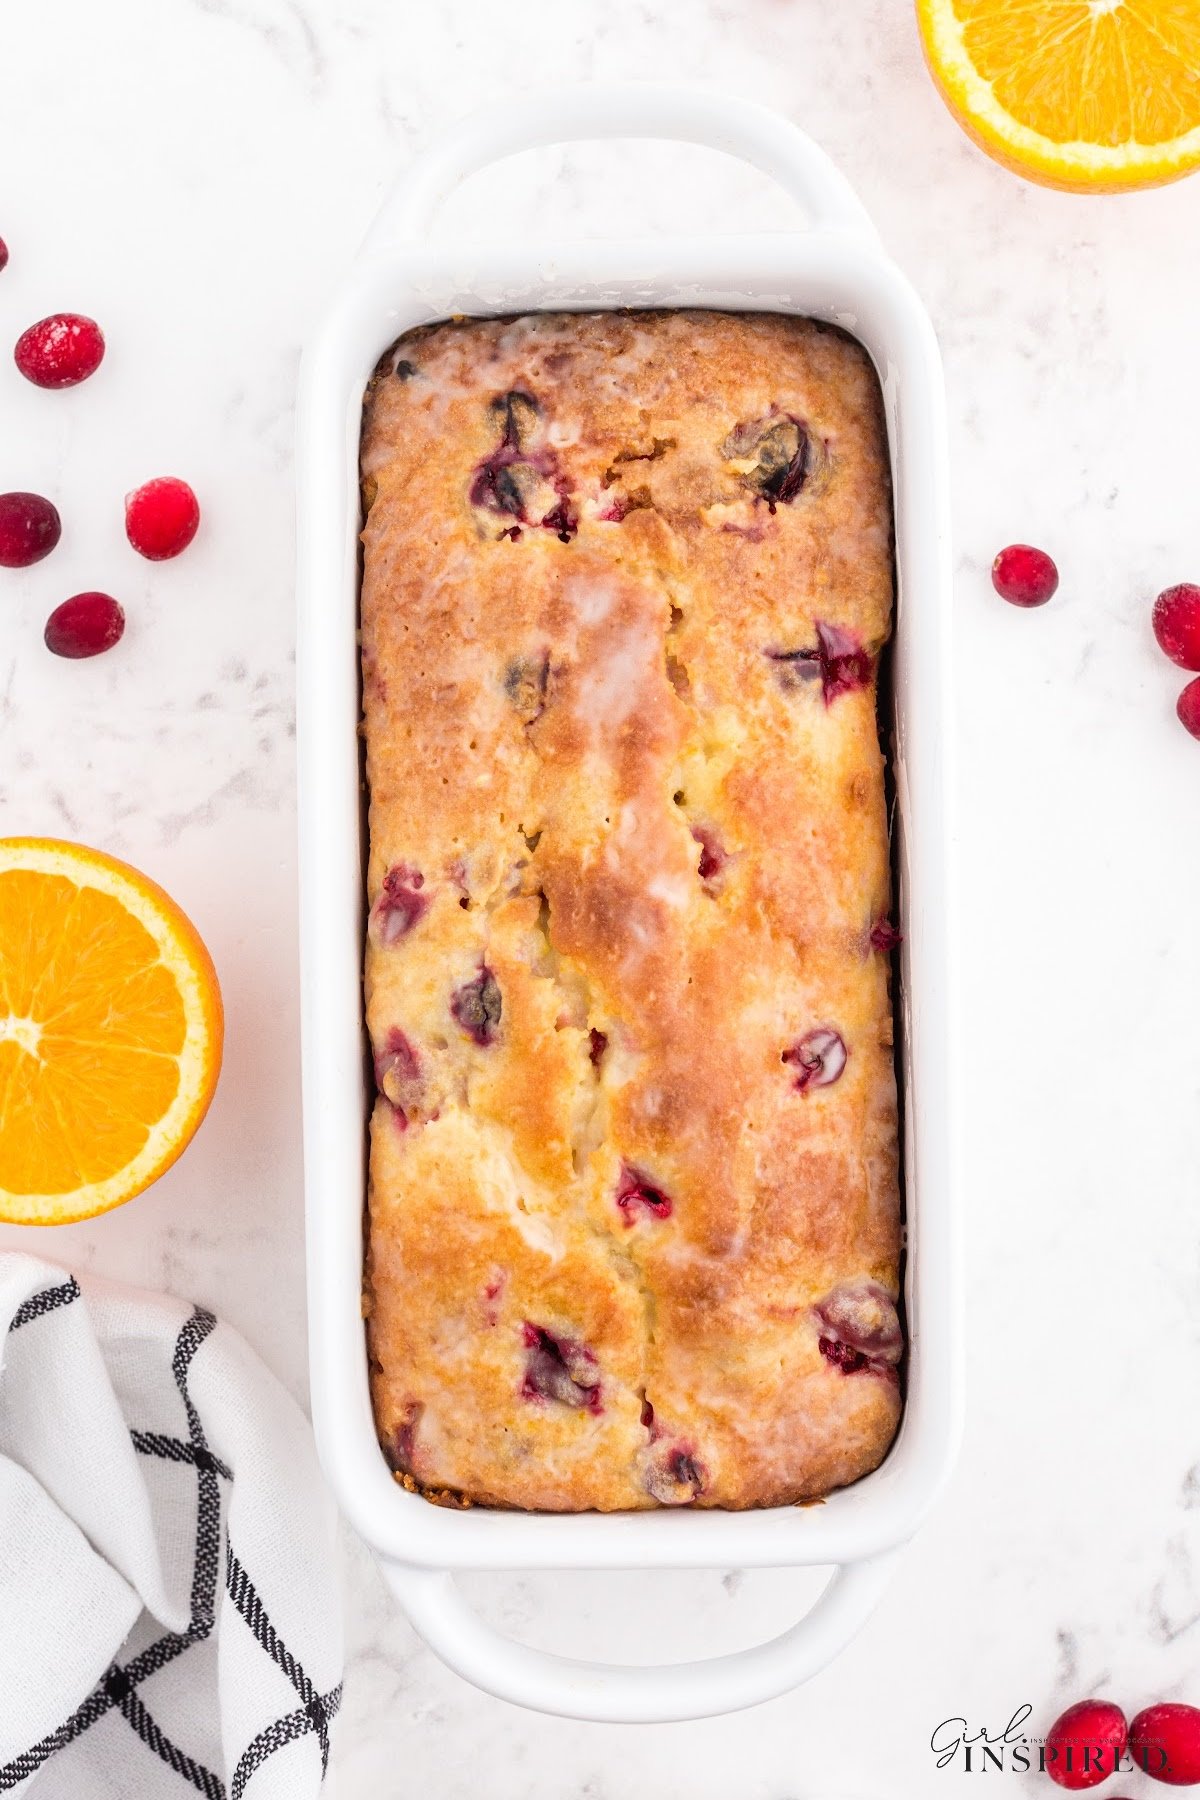 Glazed orange cranberry bread in loaf pan, with fresh oranges and cranberries scattered around.